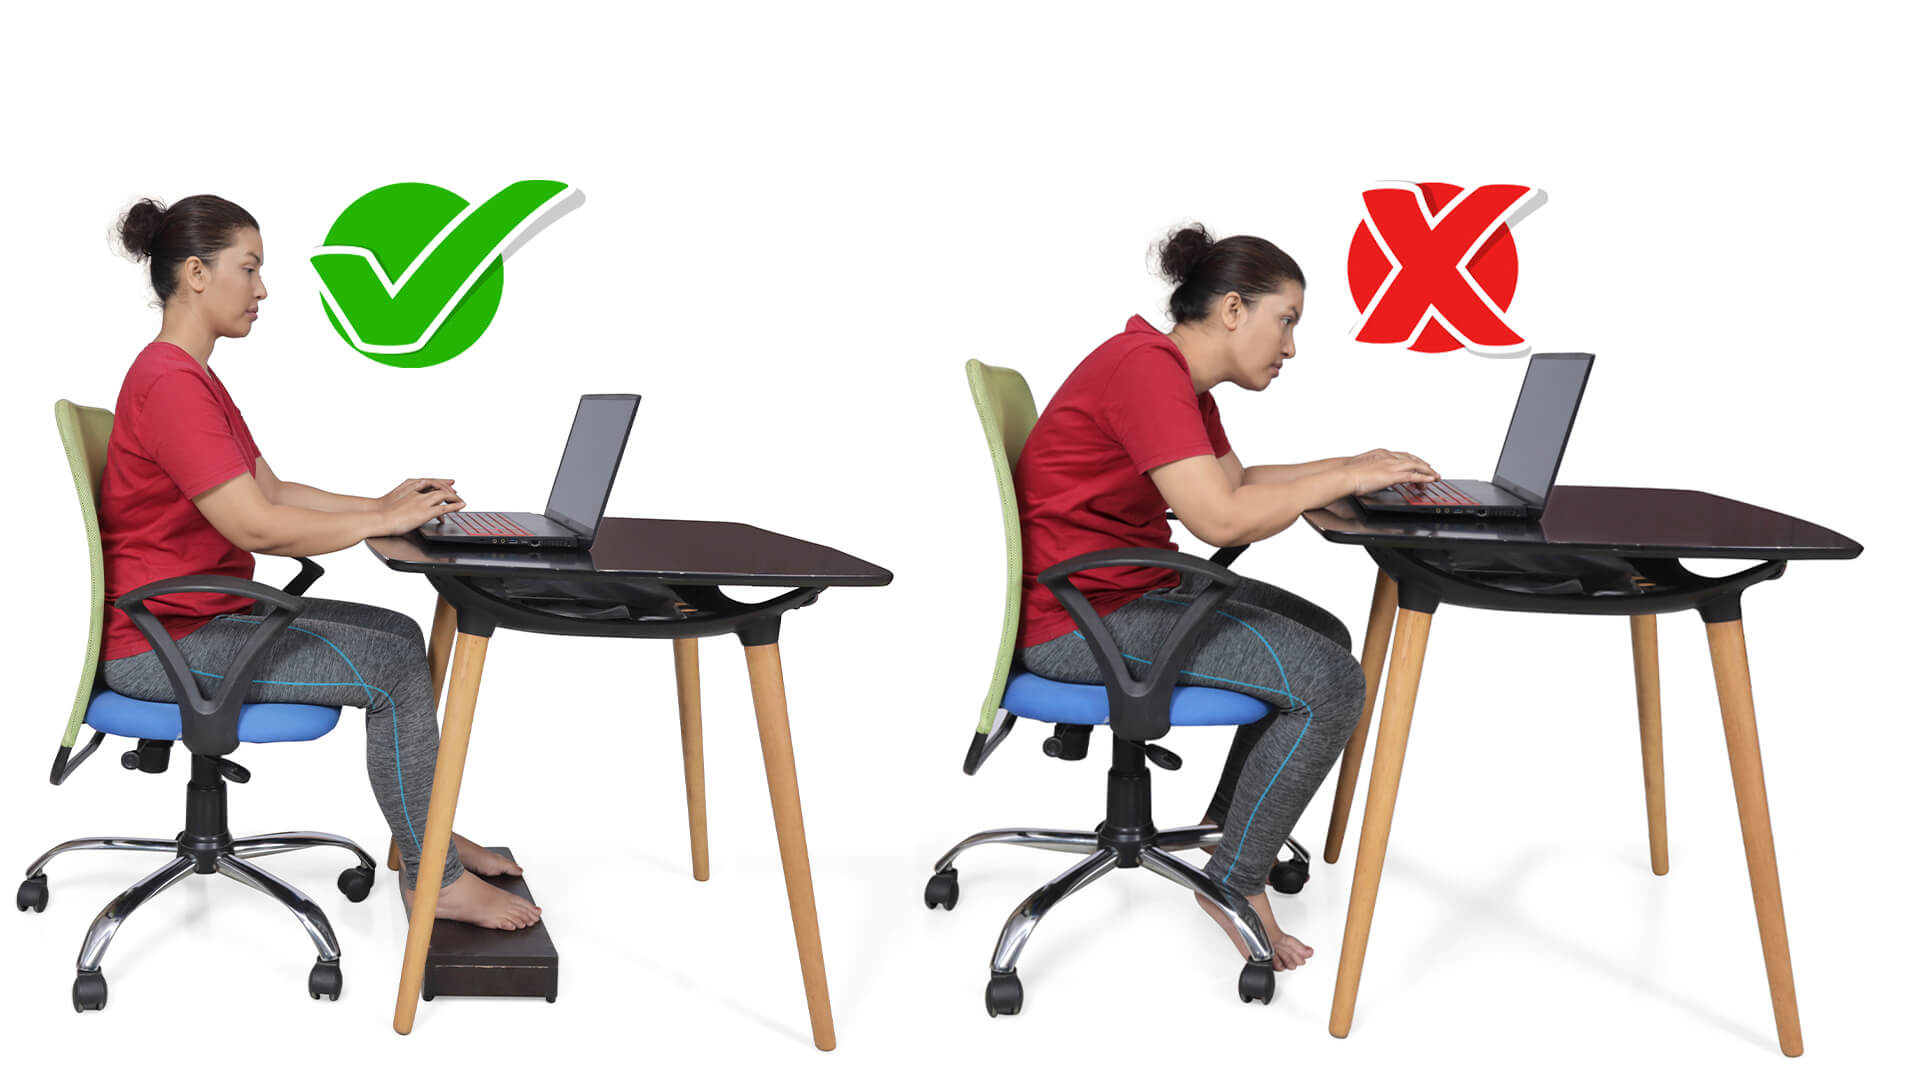 Wrong and right posture for using a latop